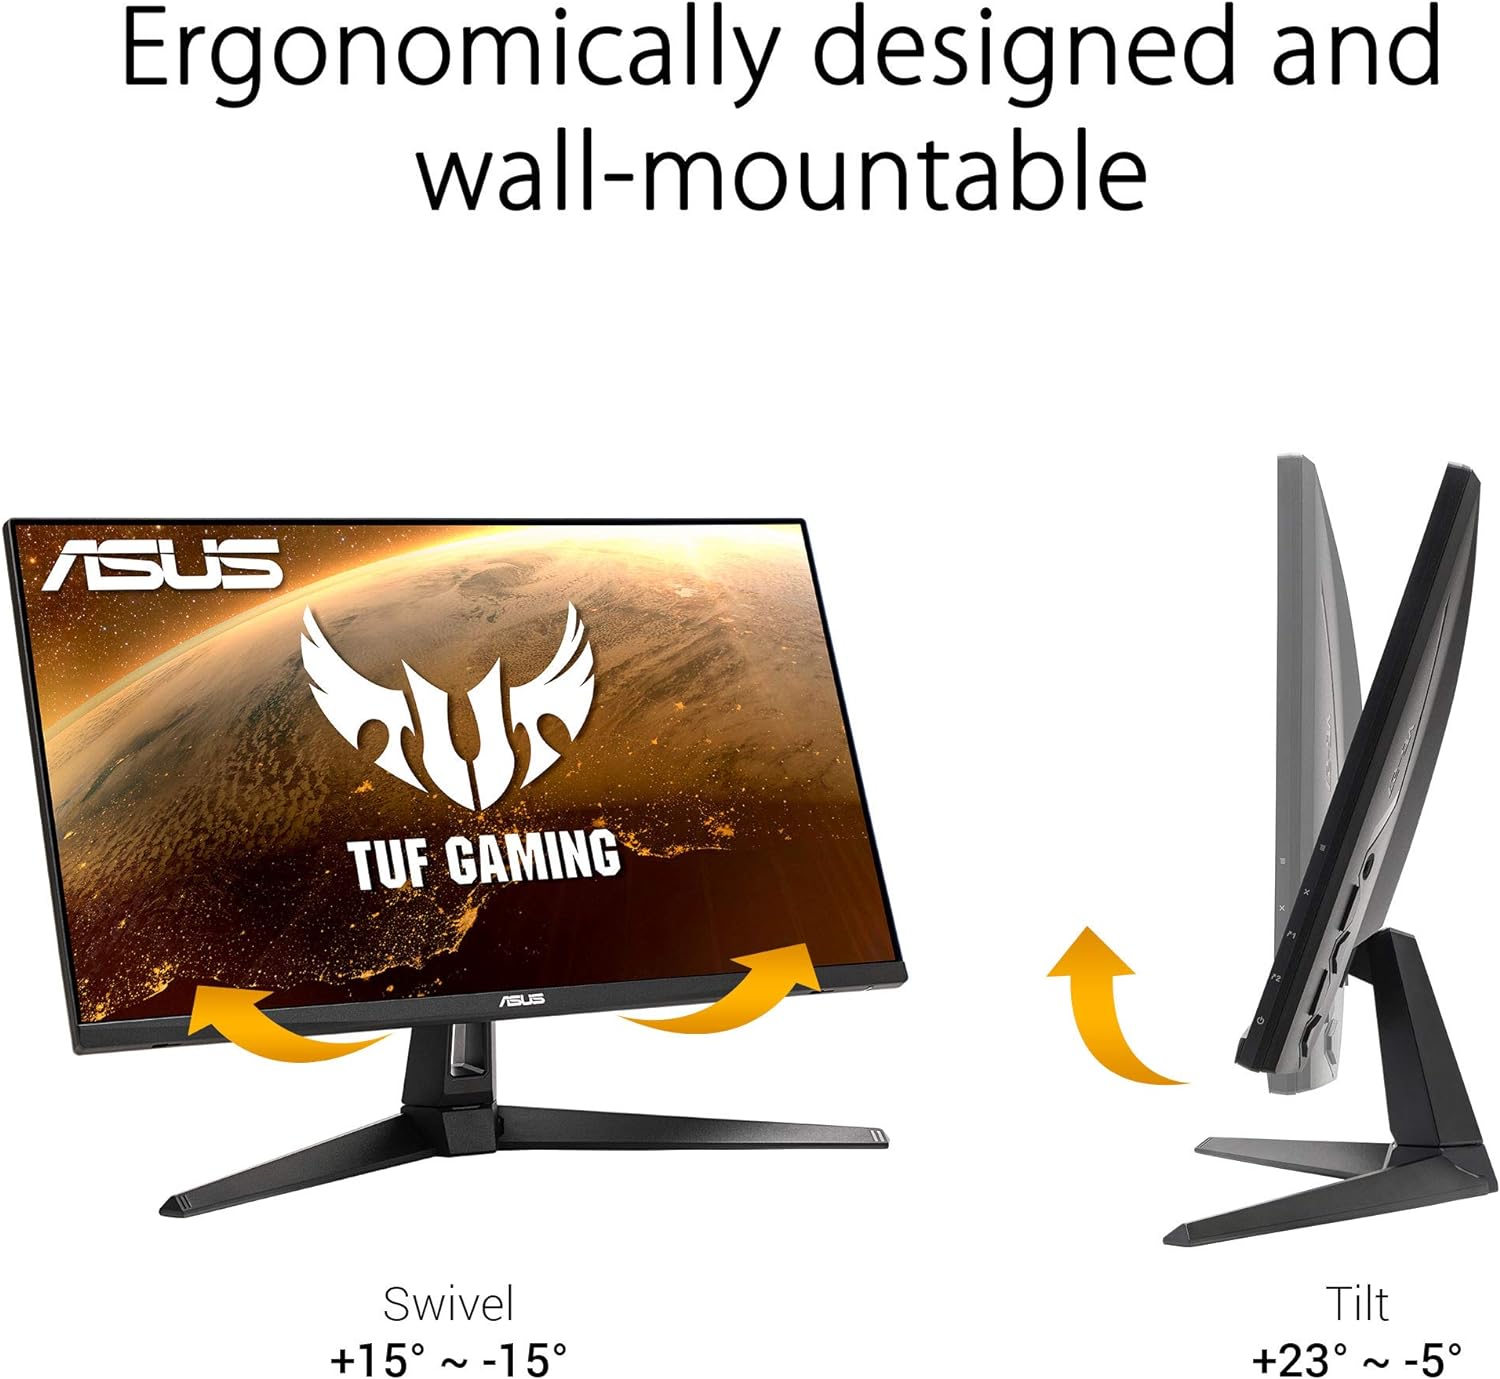 ASUS TUF Gaming VG279Q1A 27 Monitor - Shadow Boost feature enhances image details in dark scenes for better visibility. 0192876870327